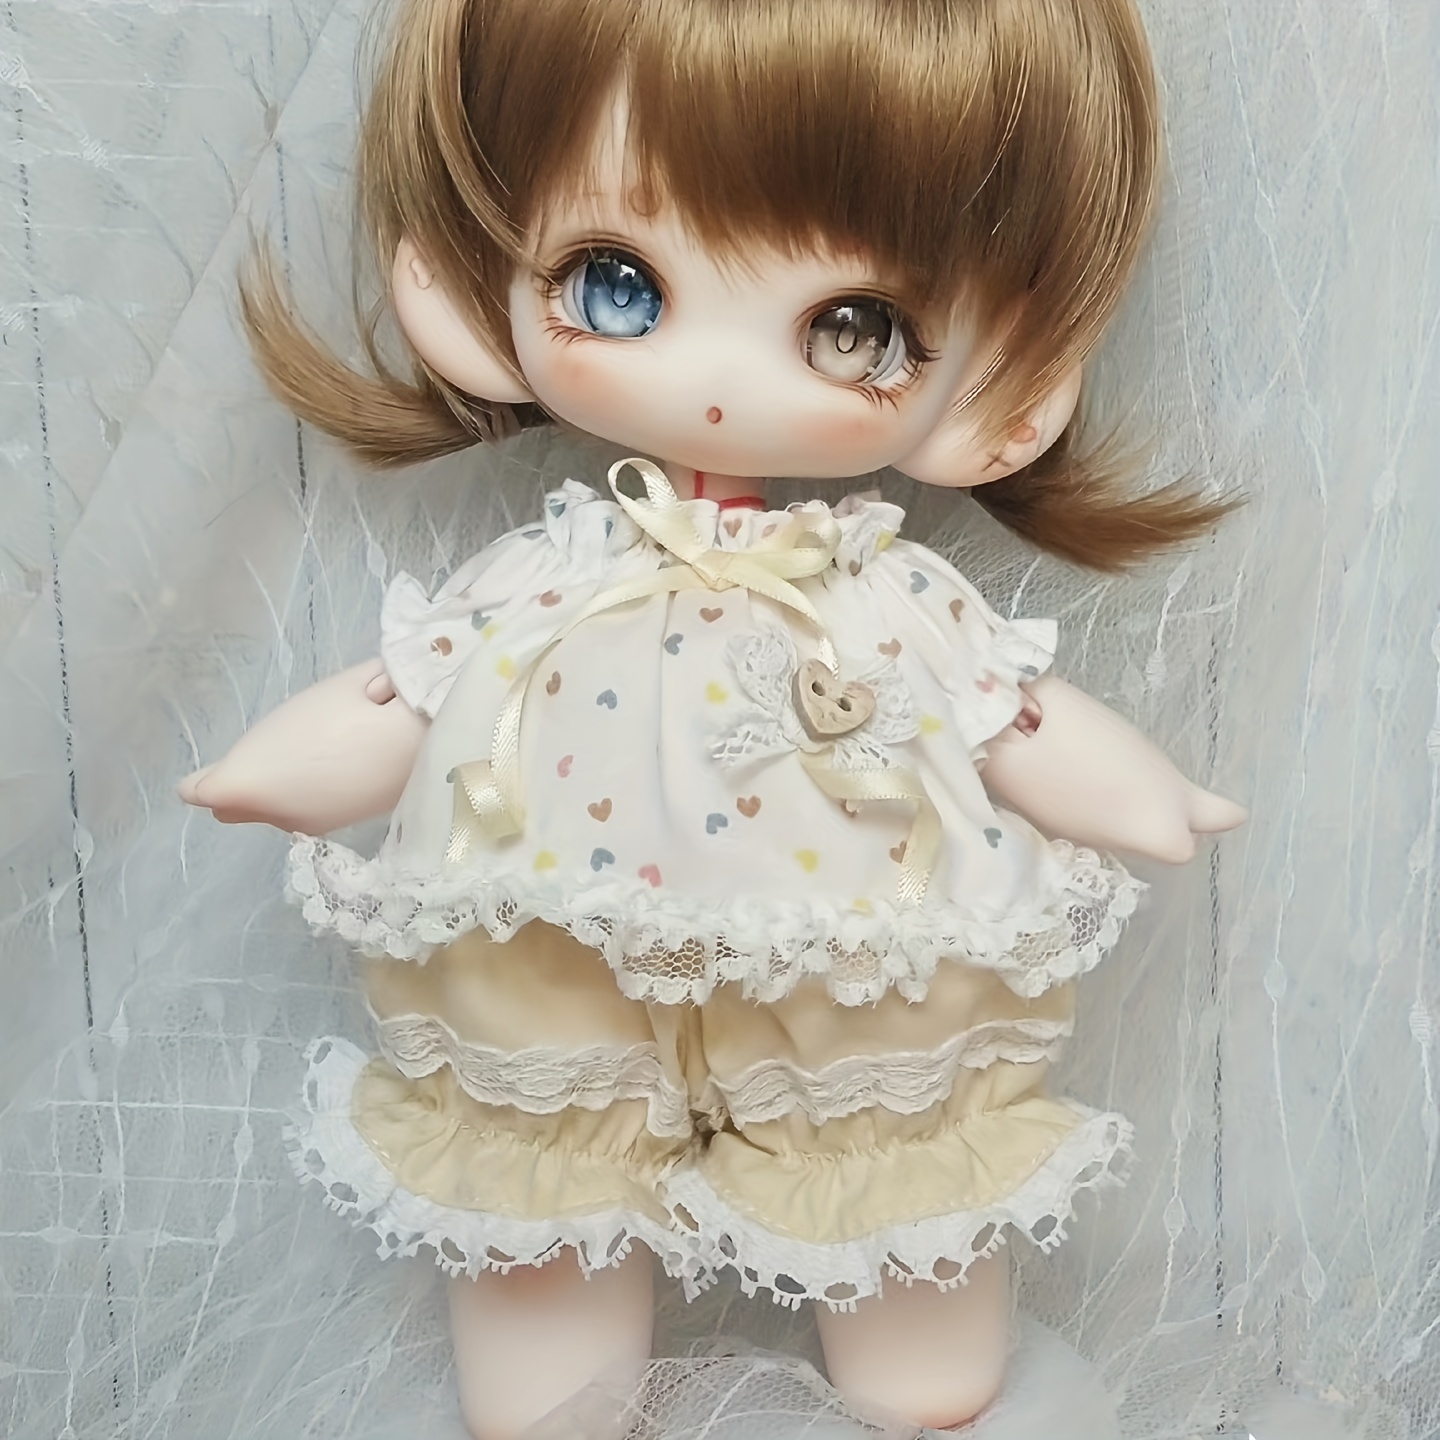 All Products : BJD Shop, BJD lovers collect community